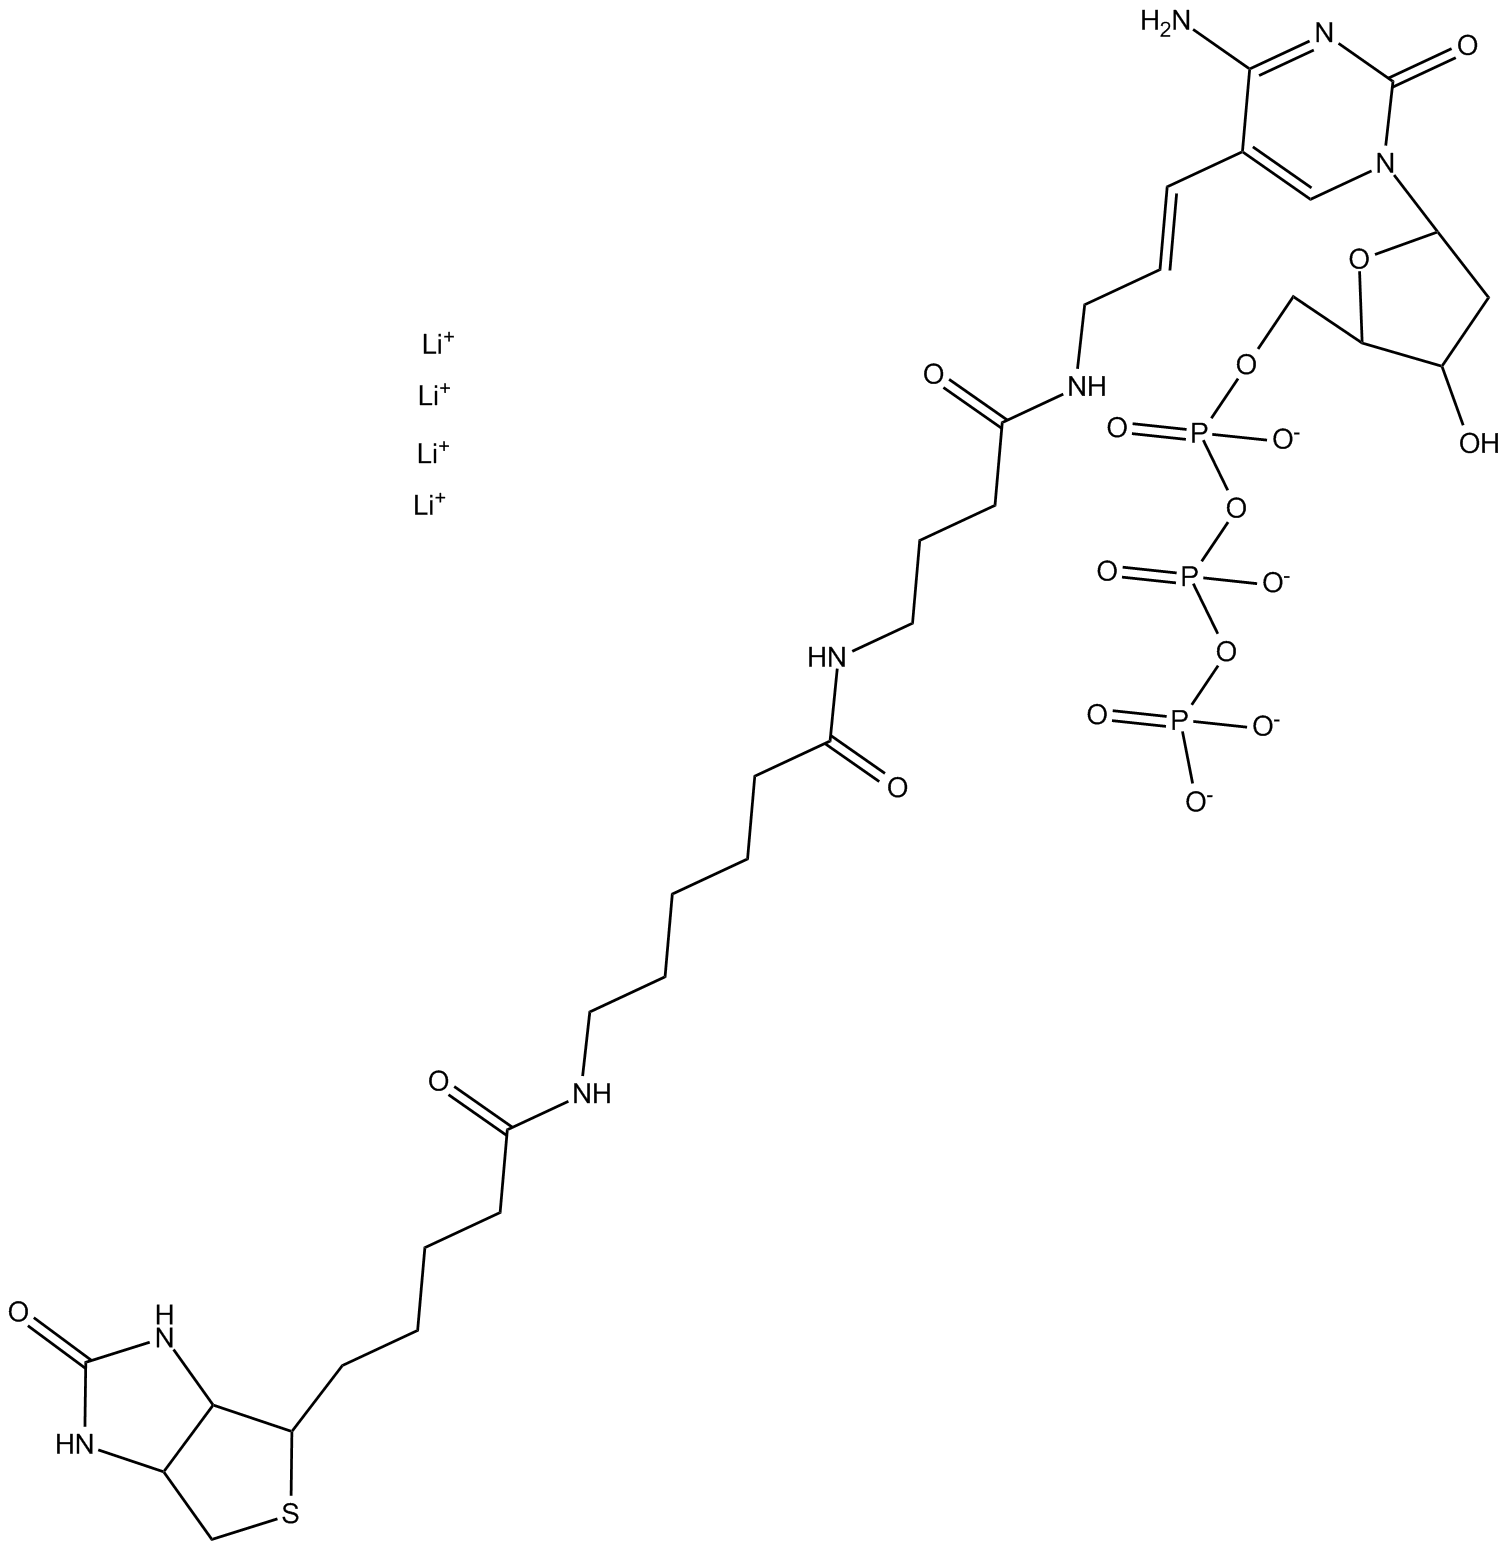 Biotin-16-dCTP  Chemical Structure